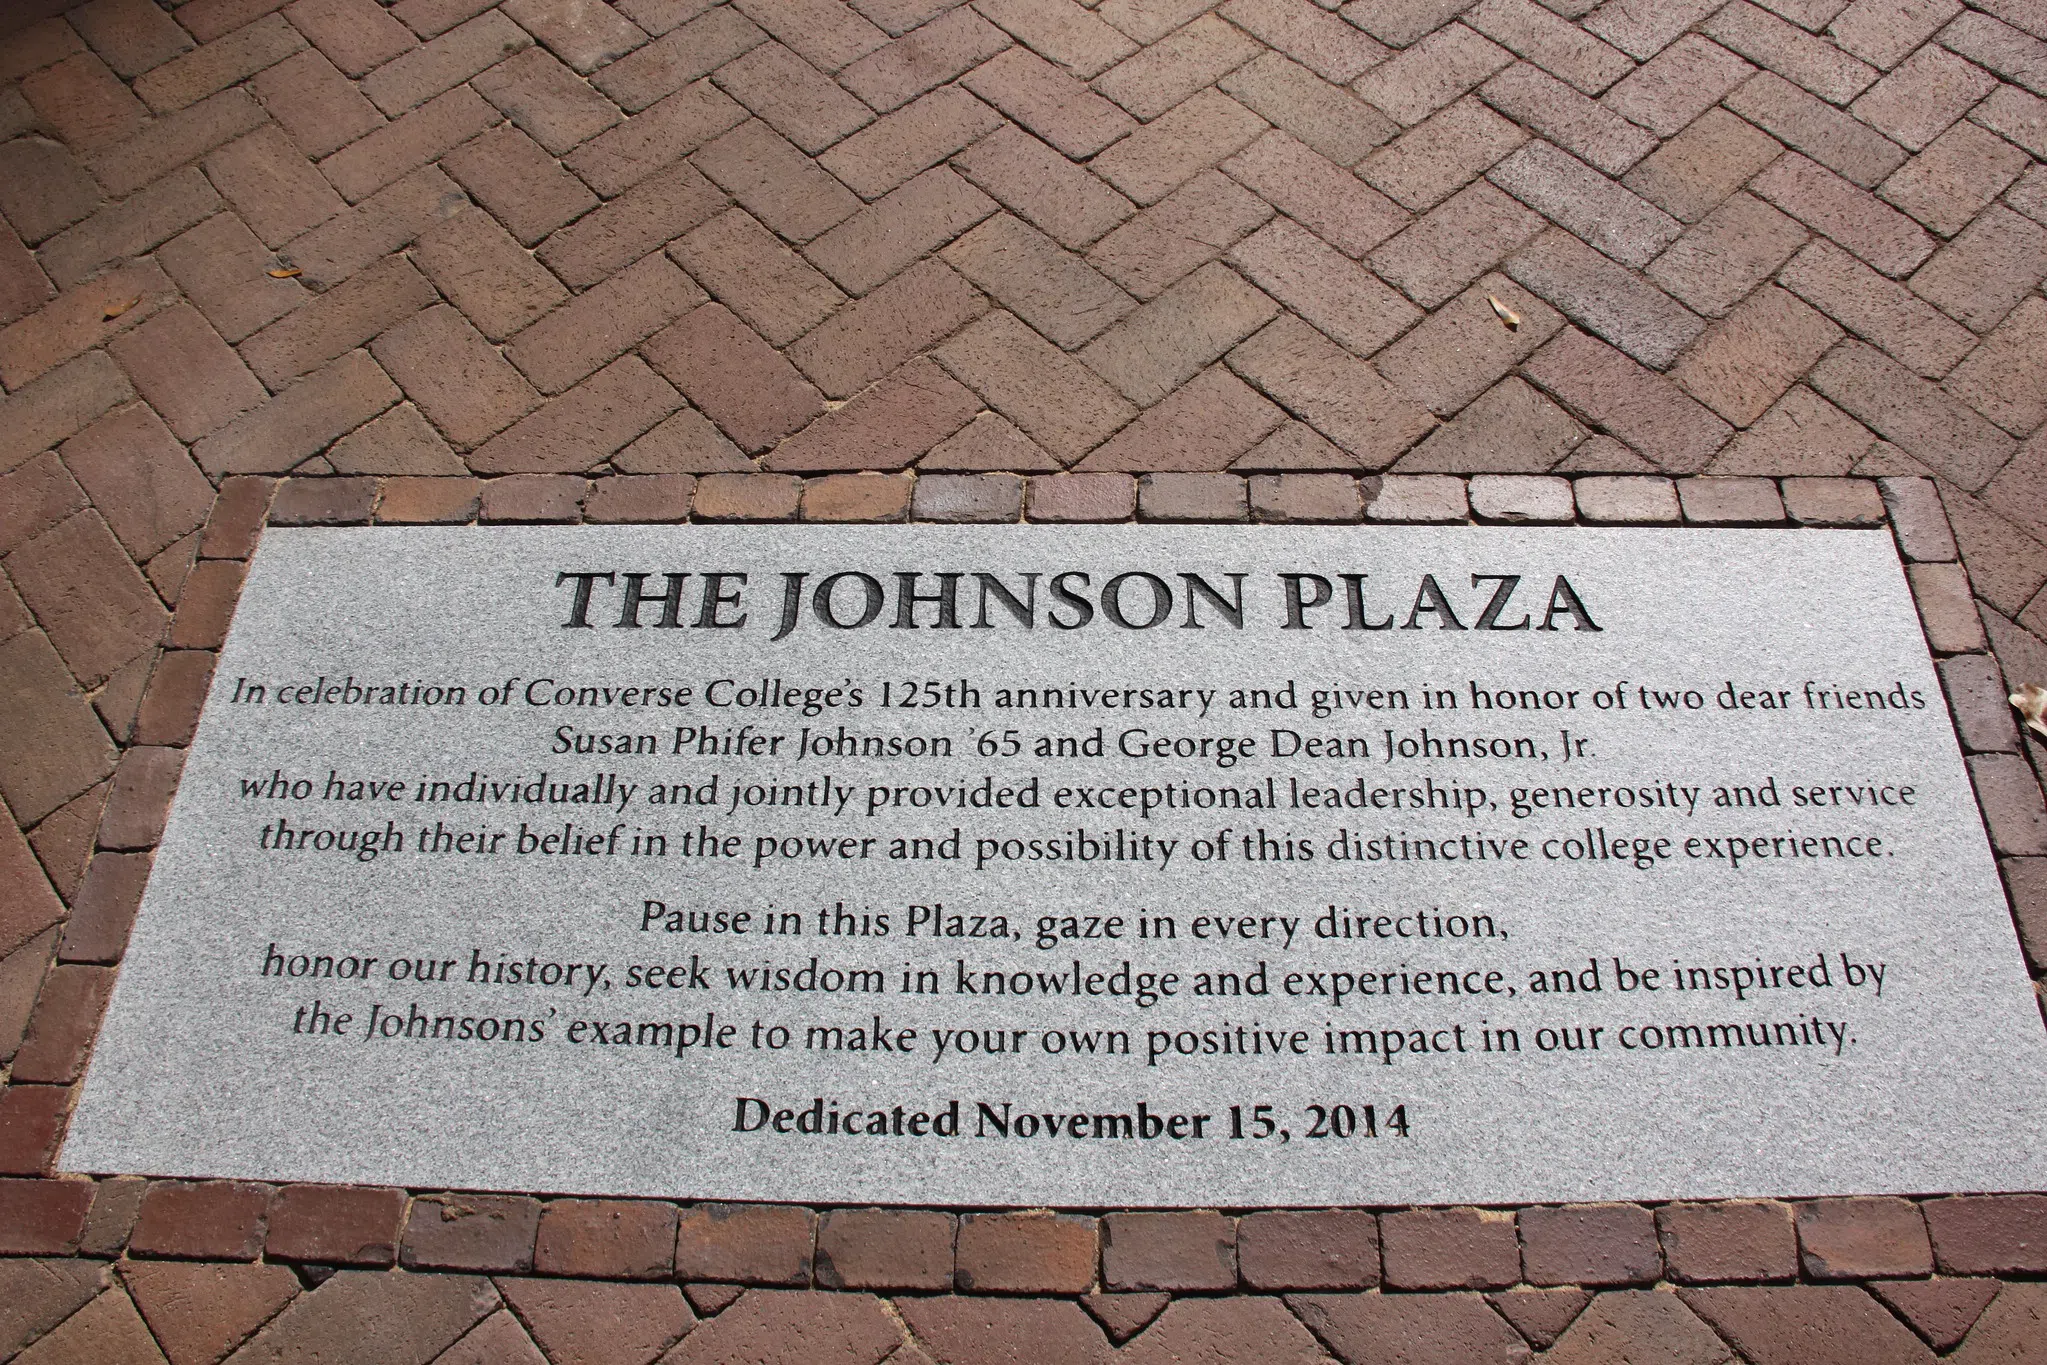 A gray concrete plaque set within a brick walkway is engraved with the words "The Johnson Plaza - In celebration of Converse College's 125th anniversary and given in honor of two dear friends Susan Phifer Johnson ’65 and George Dean Johnson, Jr. who have individually and jointly provided exceptional leadership, generosity and service through their belief in the power and possibility of this distinctive college experience. Pause in this Plaza, gaze in every direction, honor our history, seek wisdom in knowledge and experience, and be inspired by Johnson’s example to make your own positive impact in our community. Dedicated November 15, 2014